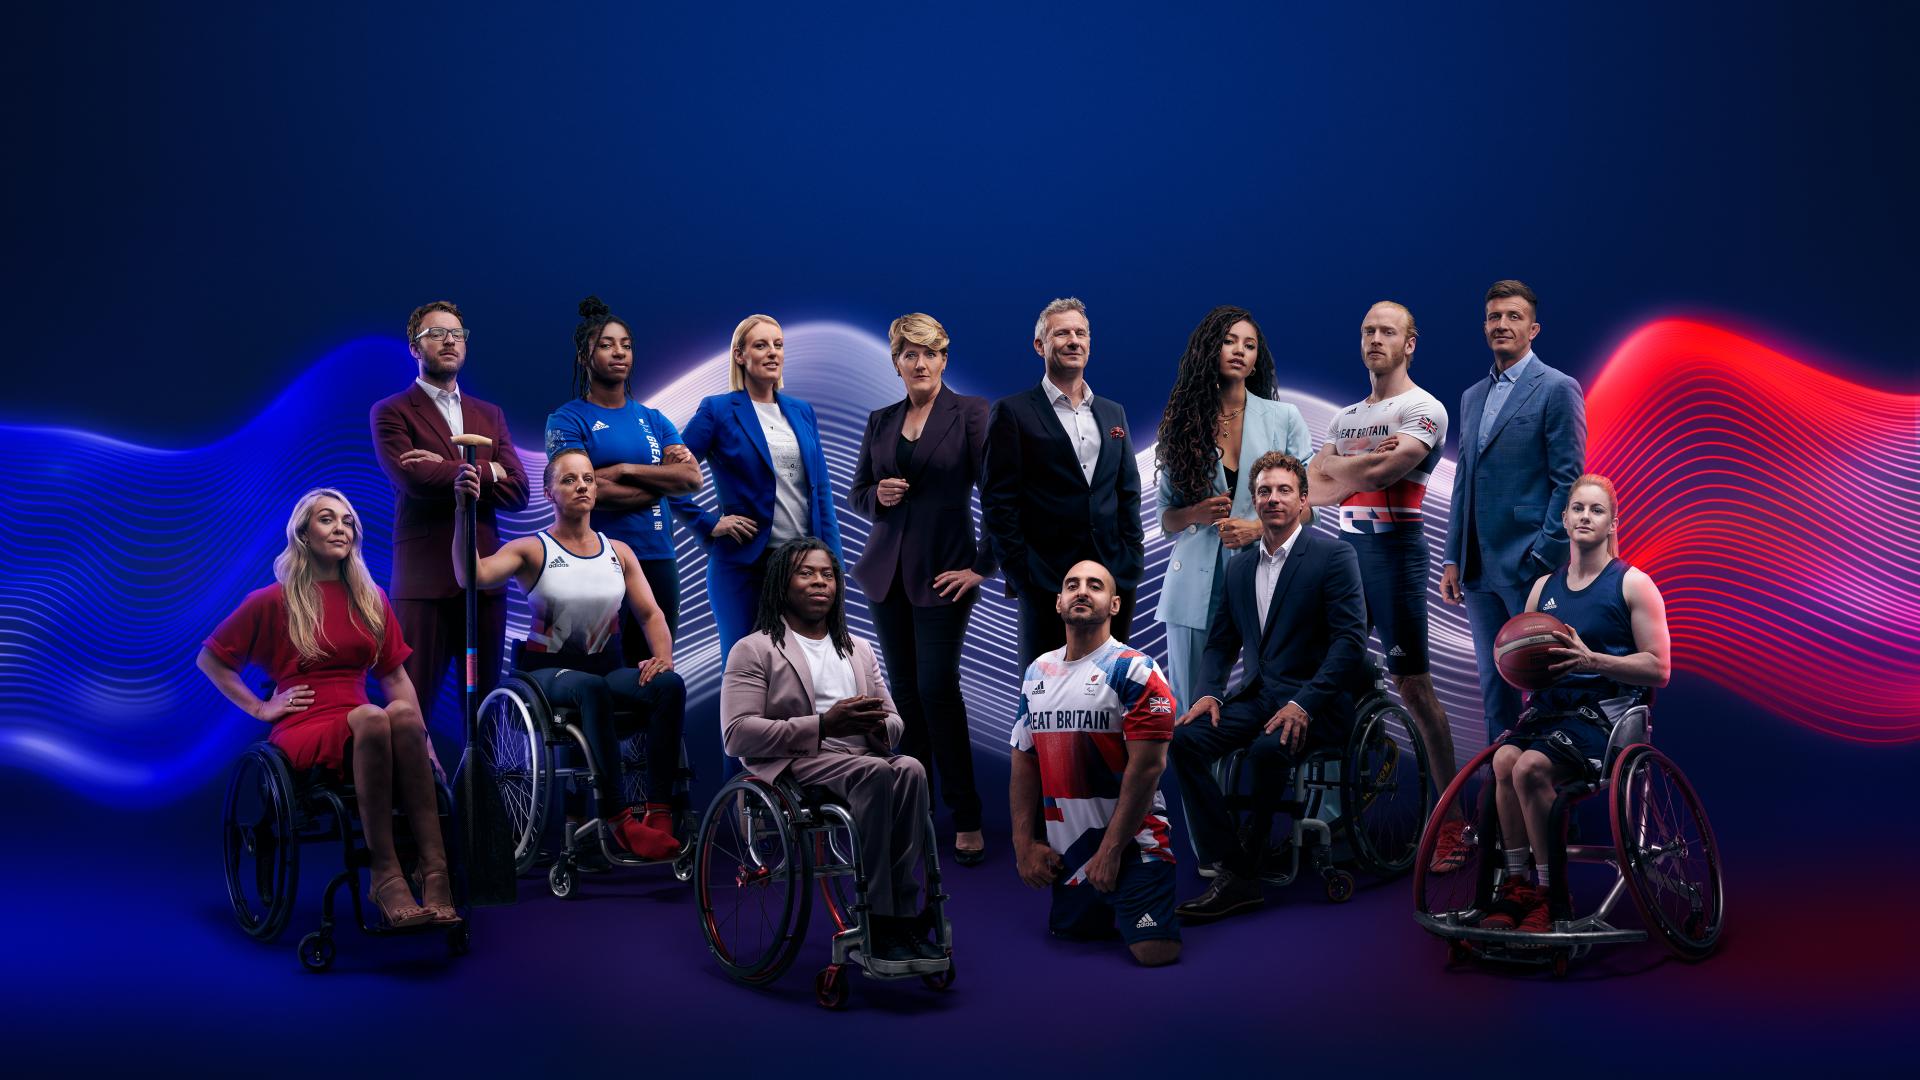 Group promotional image of the presenters and athletes from the Tokyo 2020 Paralympic Games